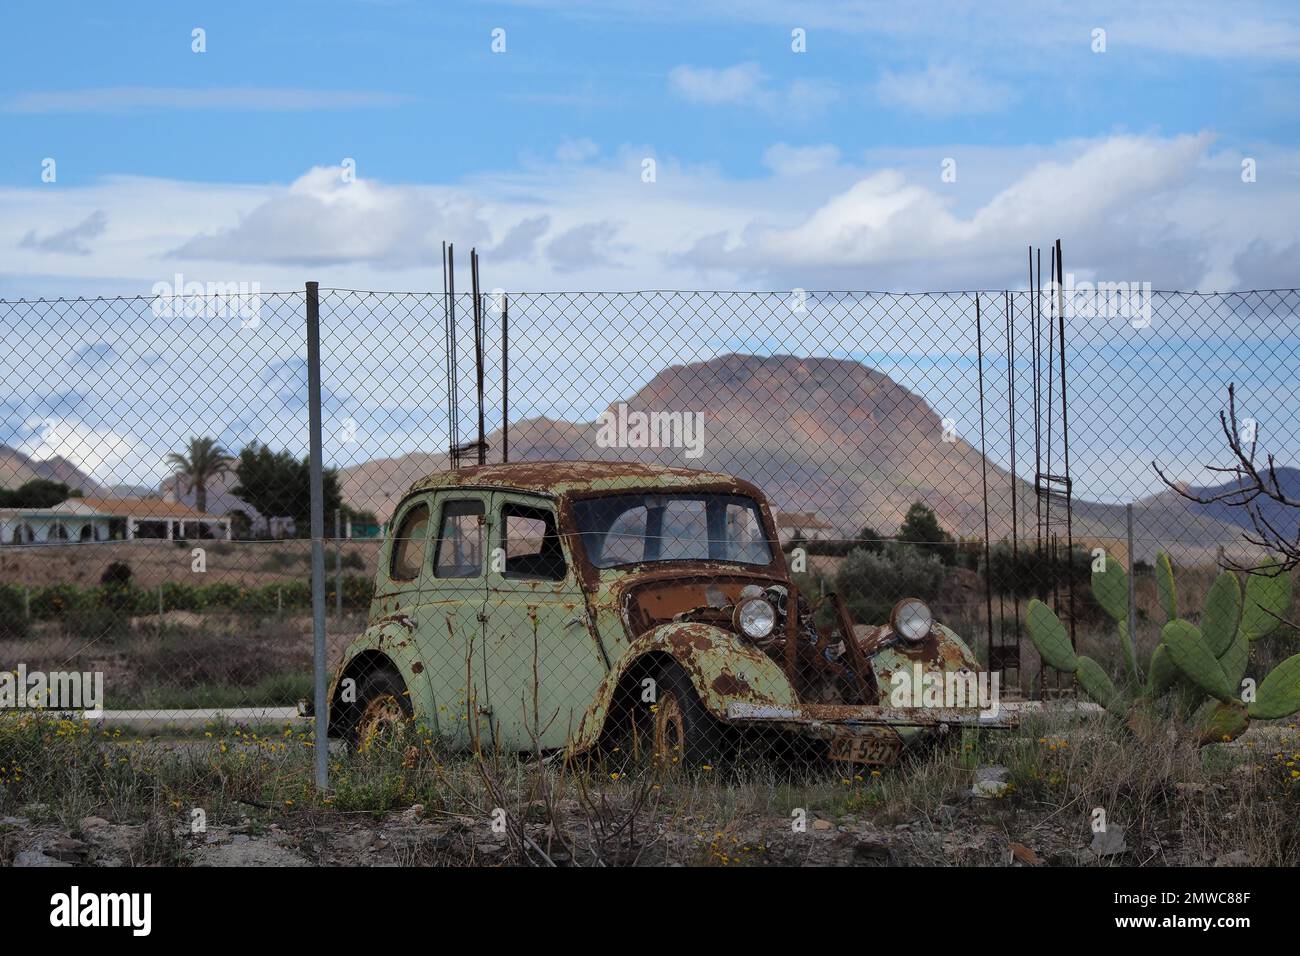 Rusty, demolished body of an old MG without bonnet behind fence made of wire mesh, Spain Stock Photo